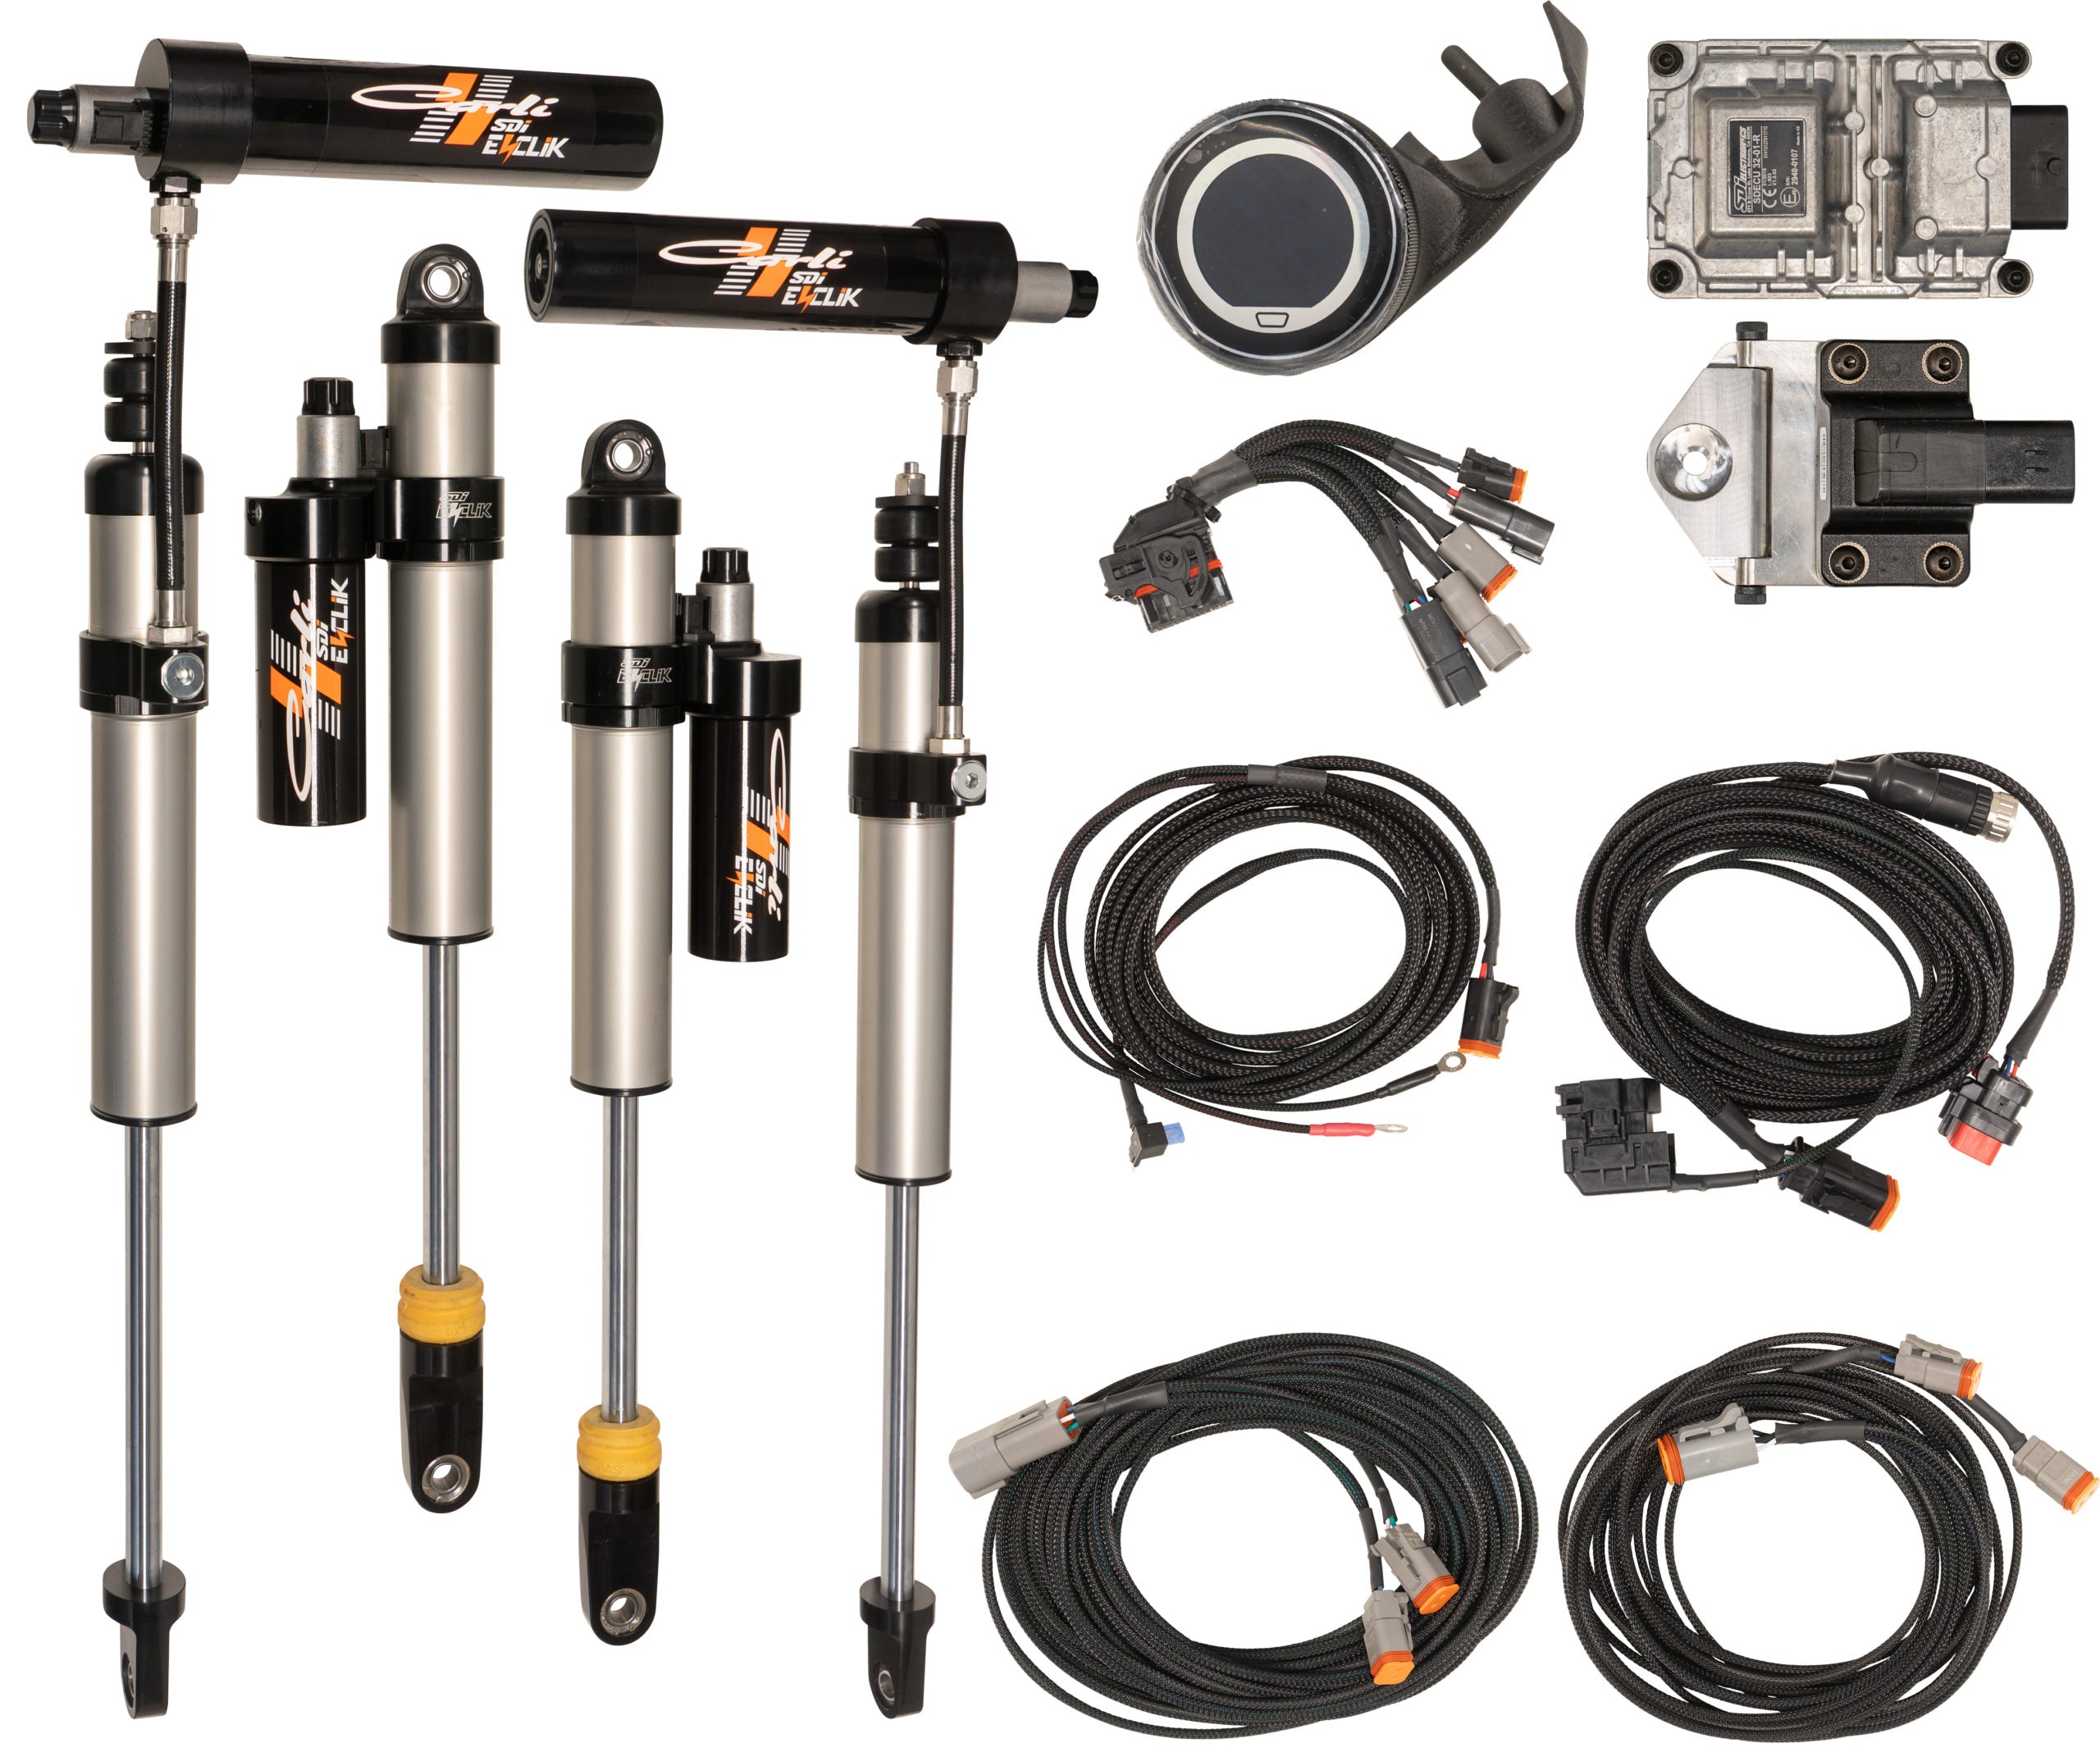 Carli Suspension CS-FEV25SPKG-45-17 Carli Eventure 2.5 inch RR 4.5 inch Lift Front and Rear Shock Pkg with Res Mounts